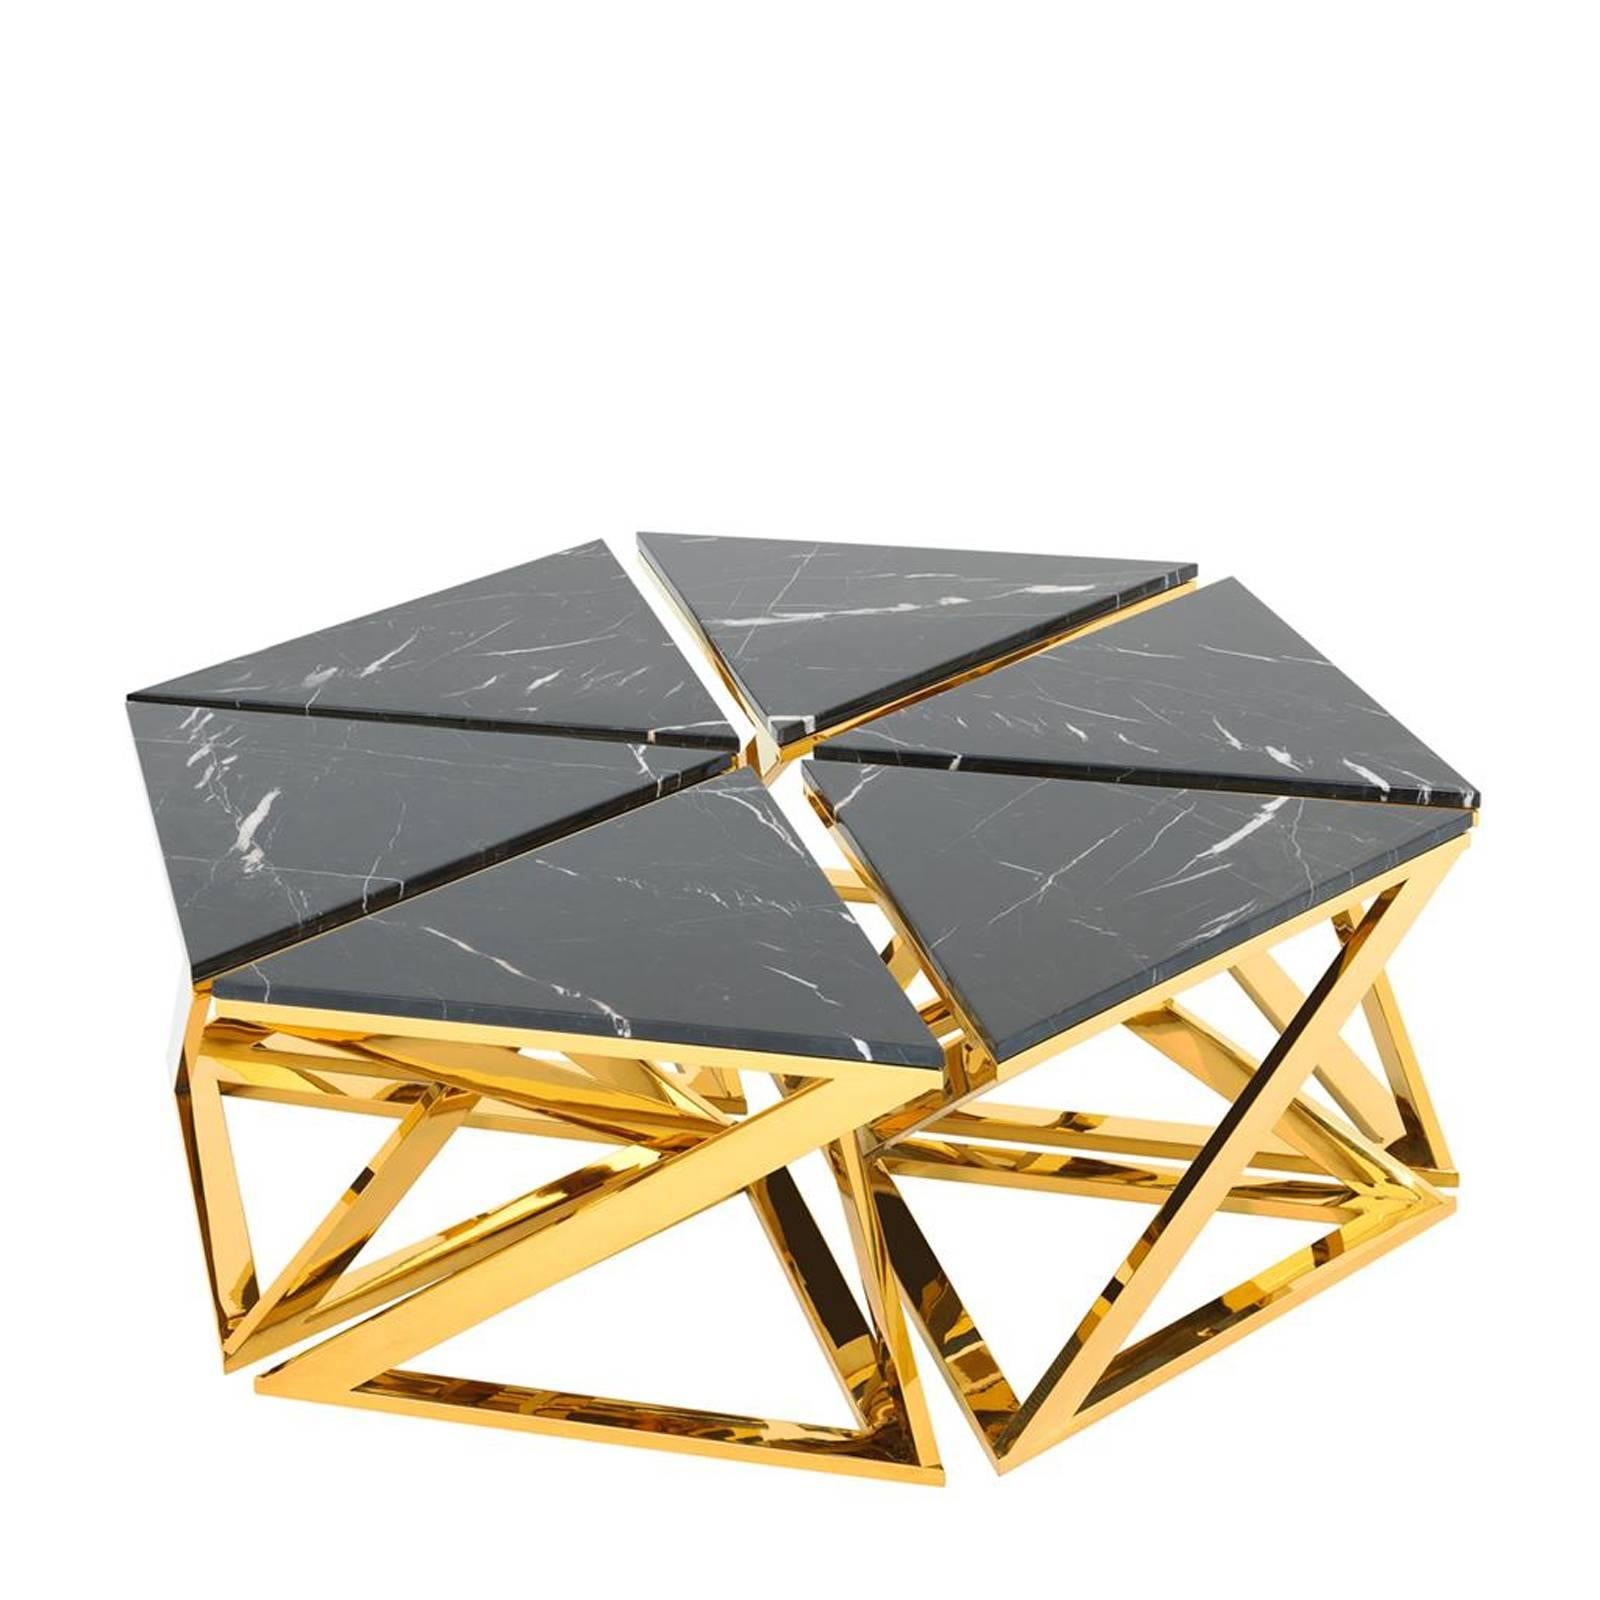 Coffee table ellipse set of six table with gold finish polished
stainless steel structure and black marble top.
Measures: L 123 x D 141 x H 45.5 cm and L 69 x D 60 x H 45.5 cm per piece.
Also available in polished stainless steel.
 